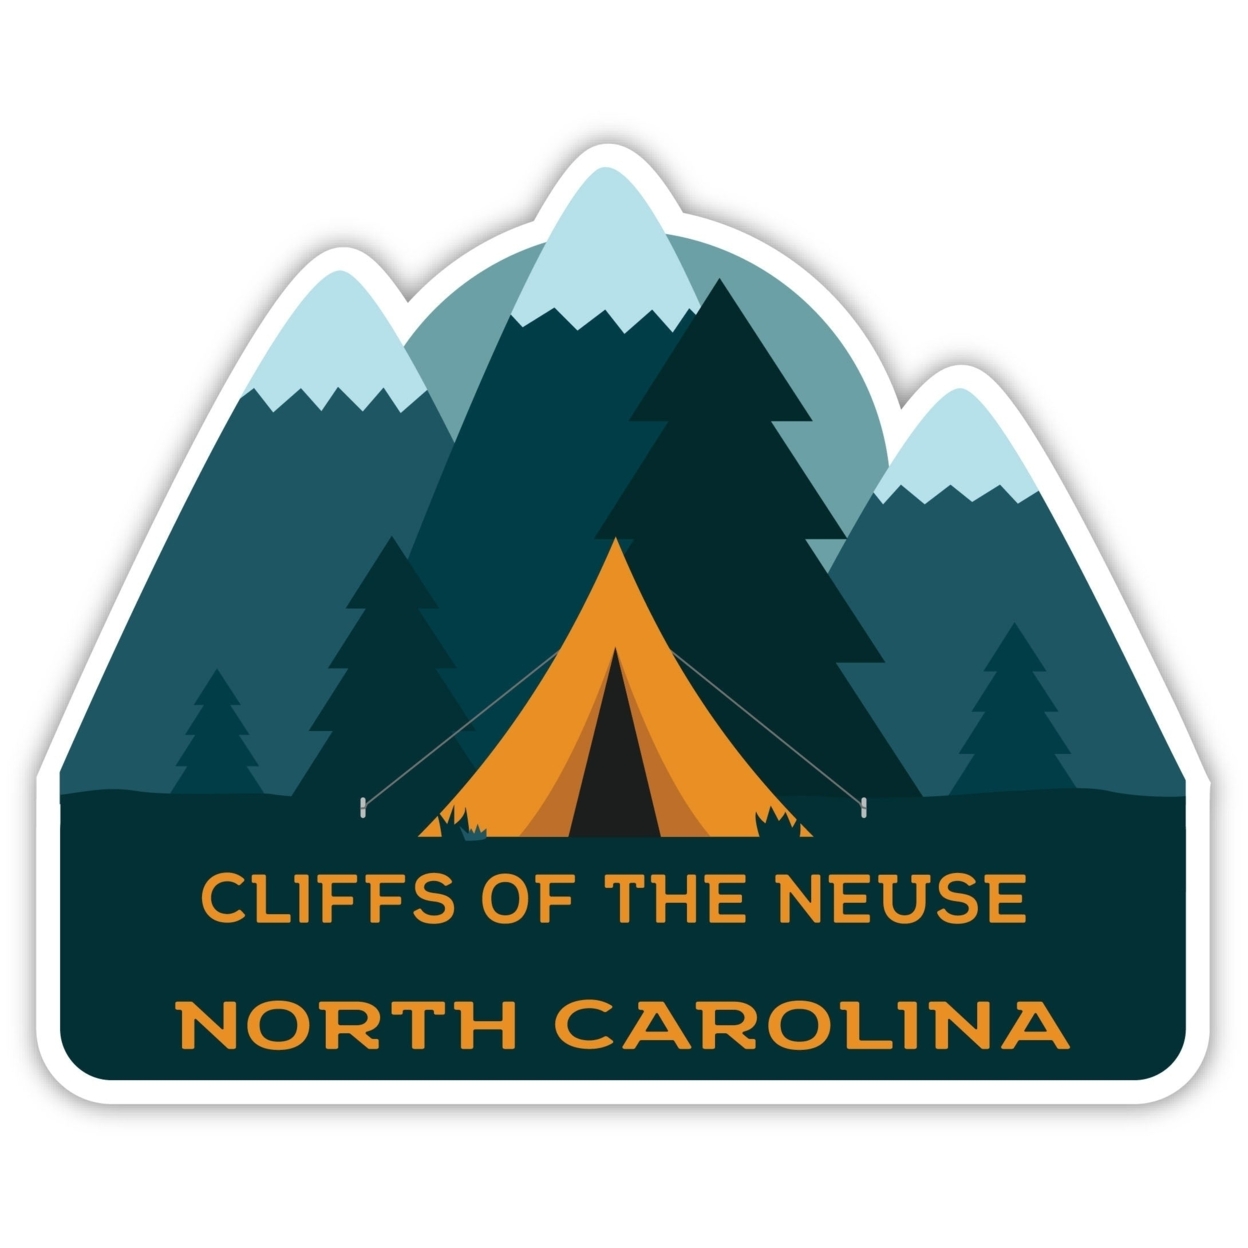 Cliffs Of The Neuse North Carolina Souvenir Decorative Stickers (Choose Theme And Size) - 4-Pack, 2-Inch, Tent